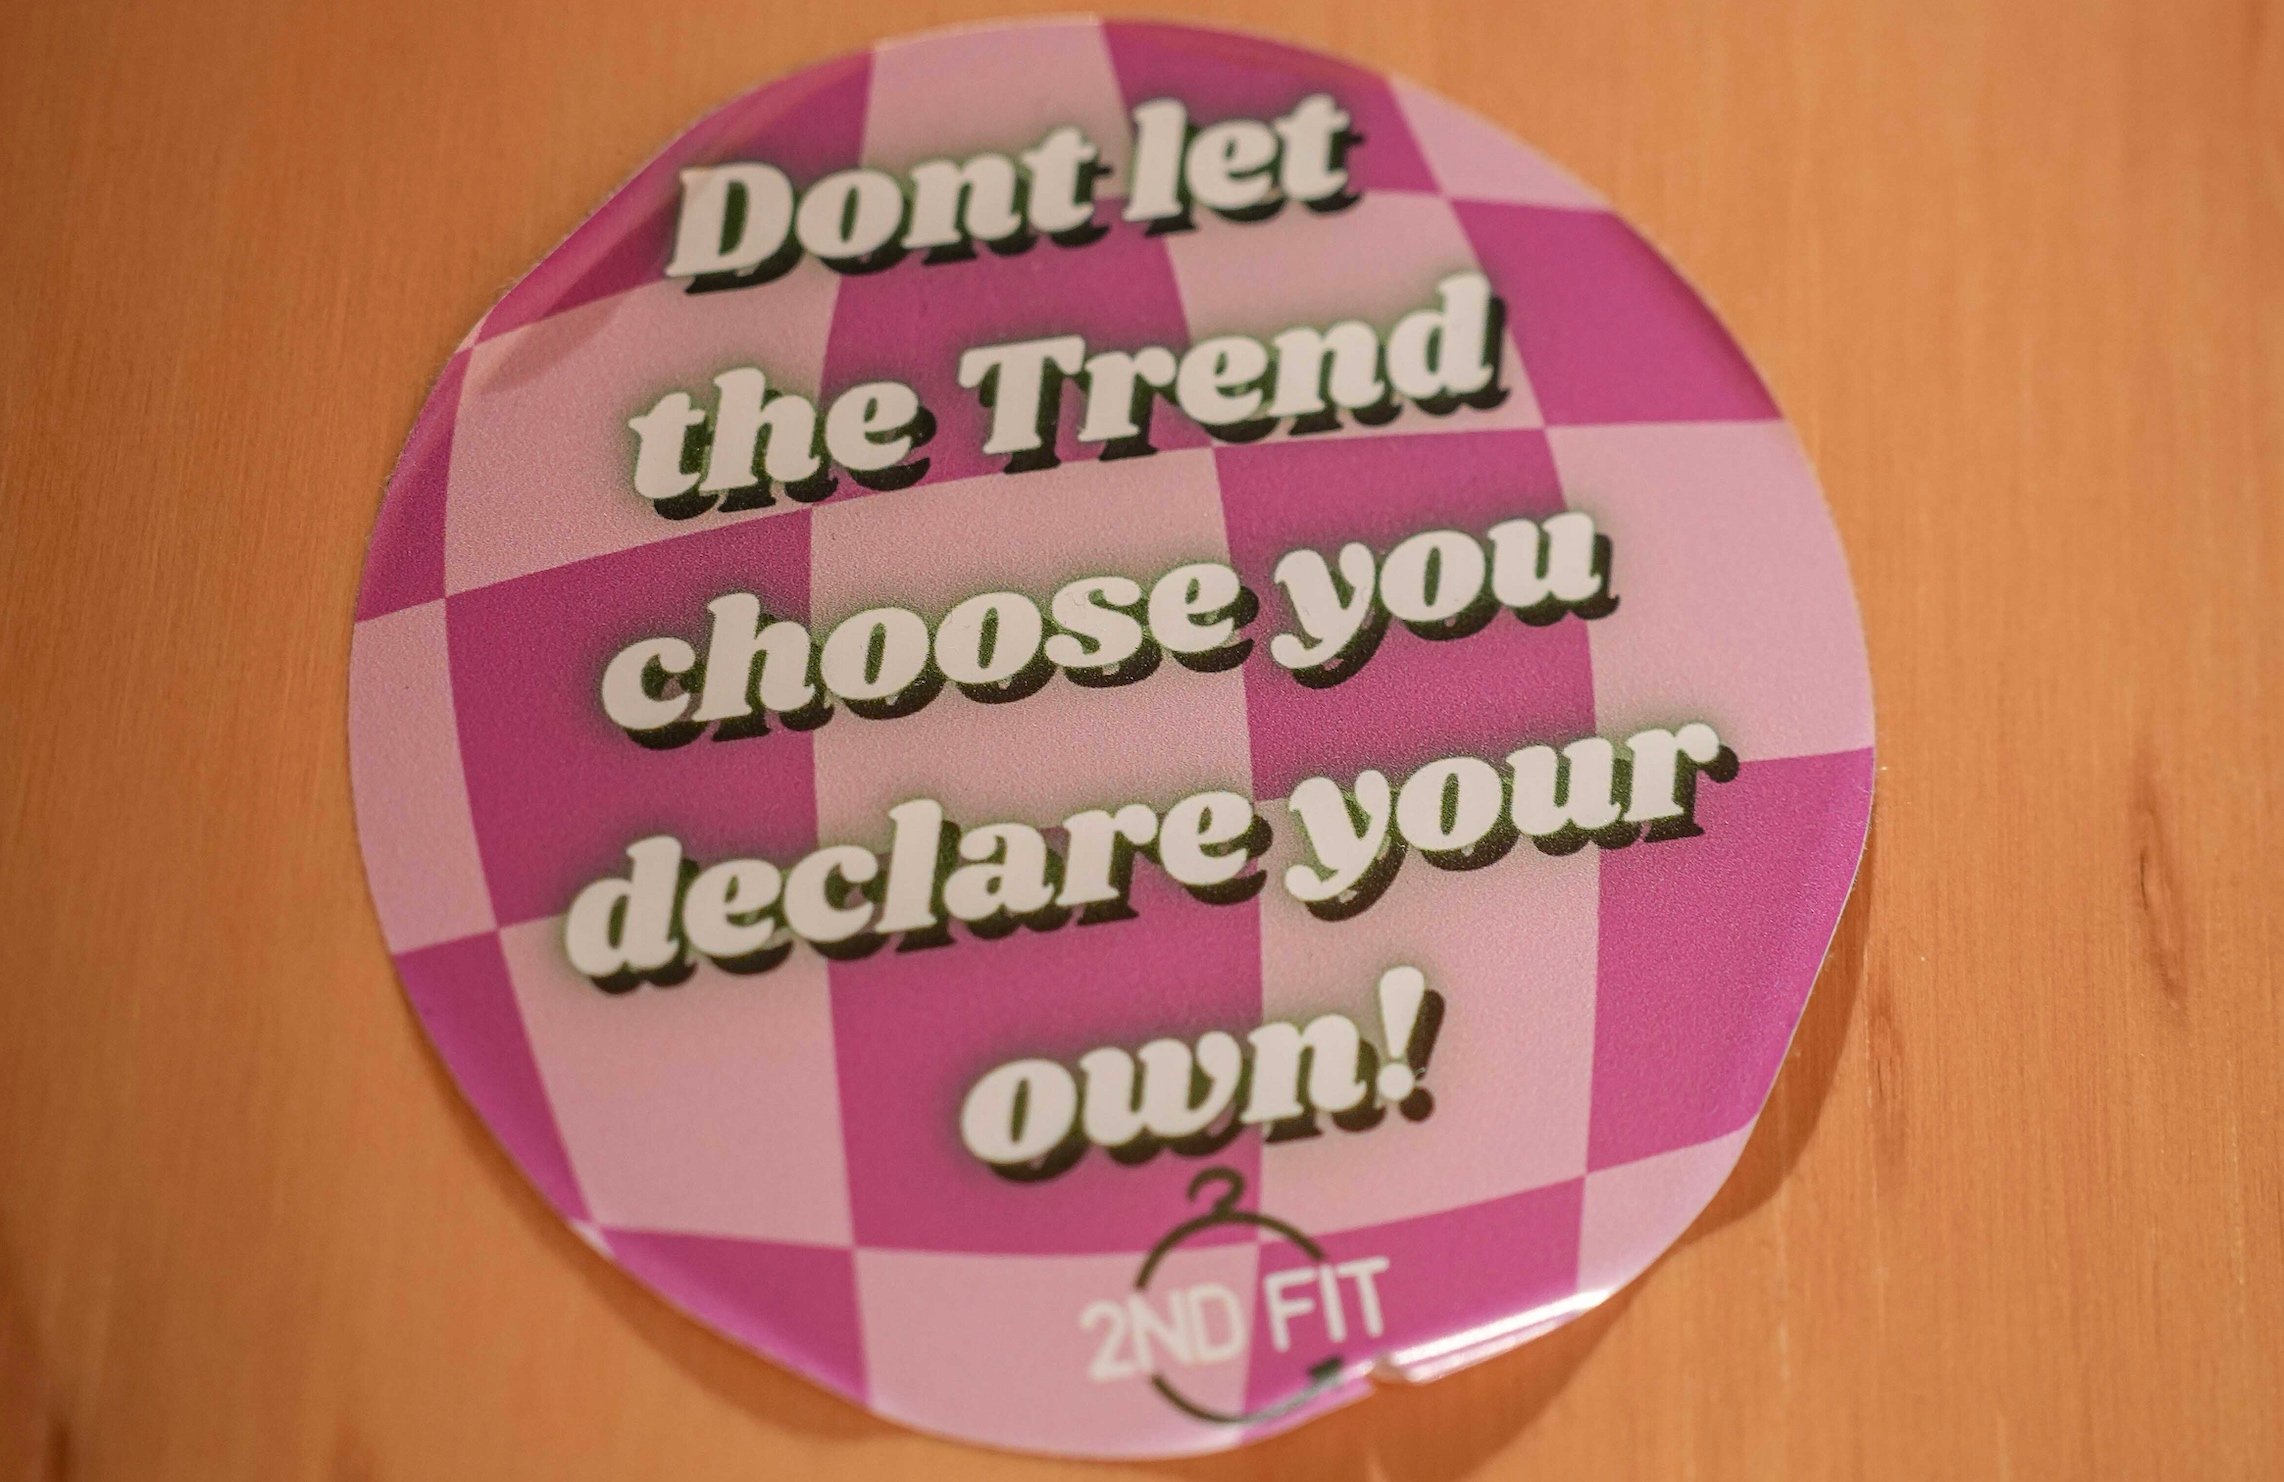 don't let the trend choose you declare your own 2nd Fit